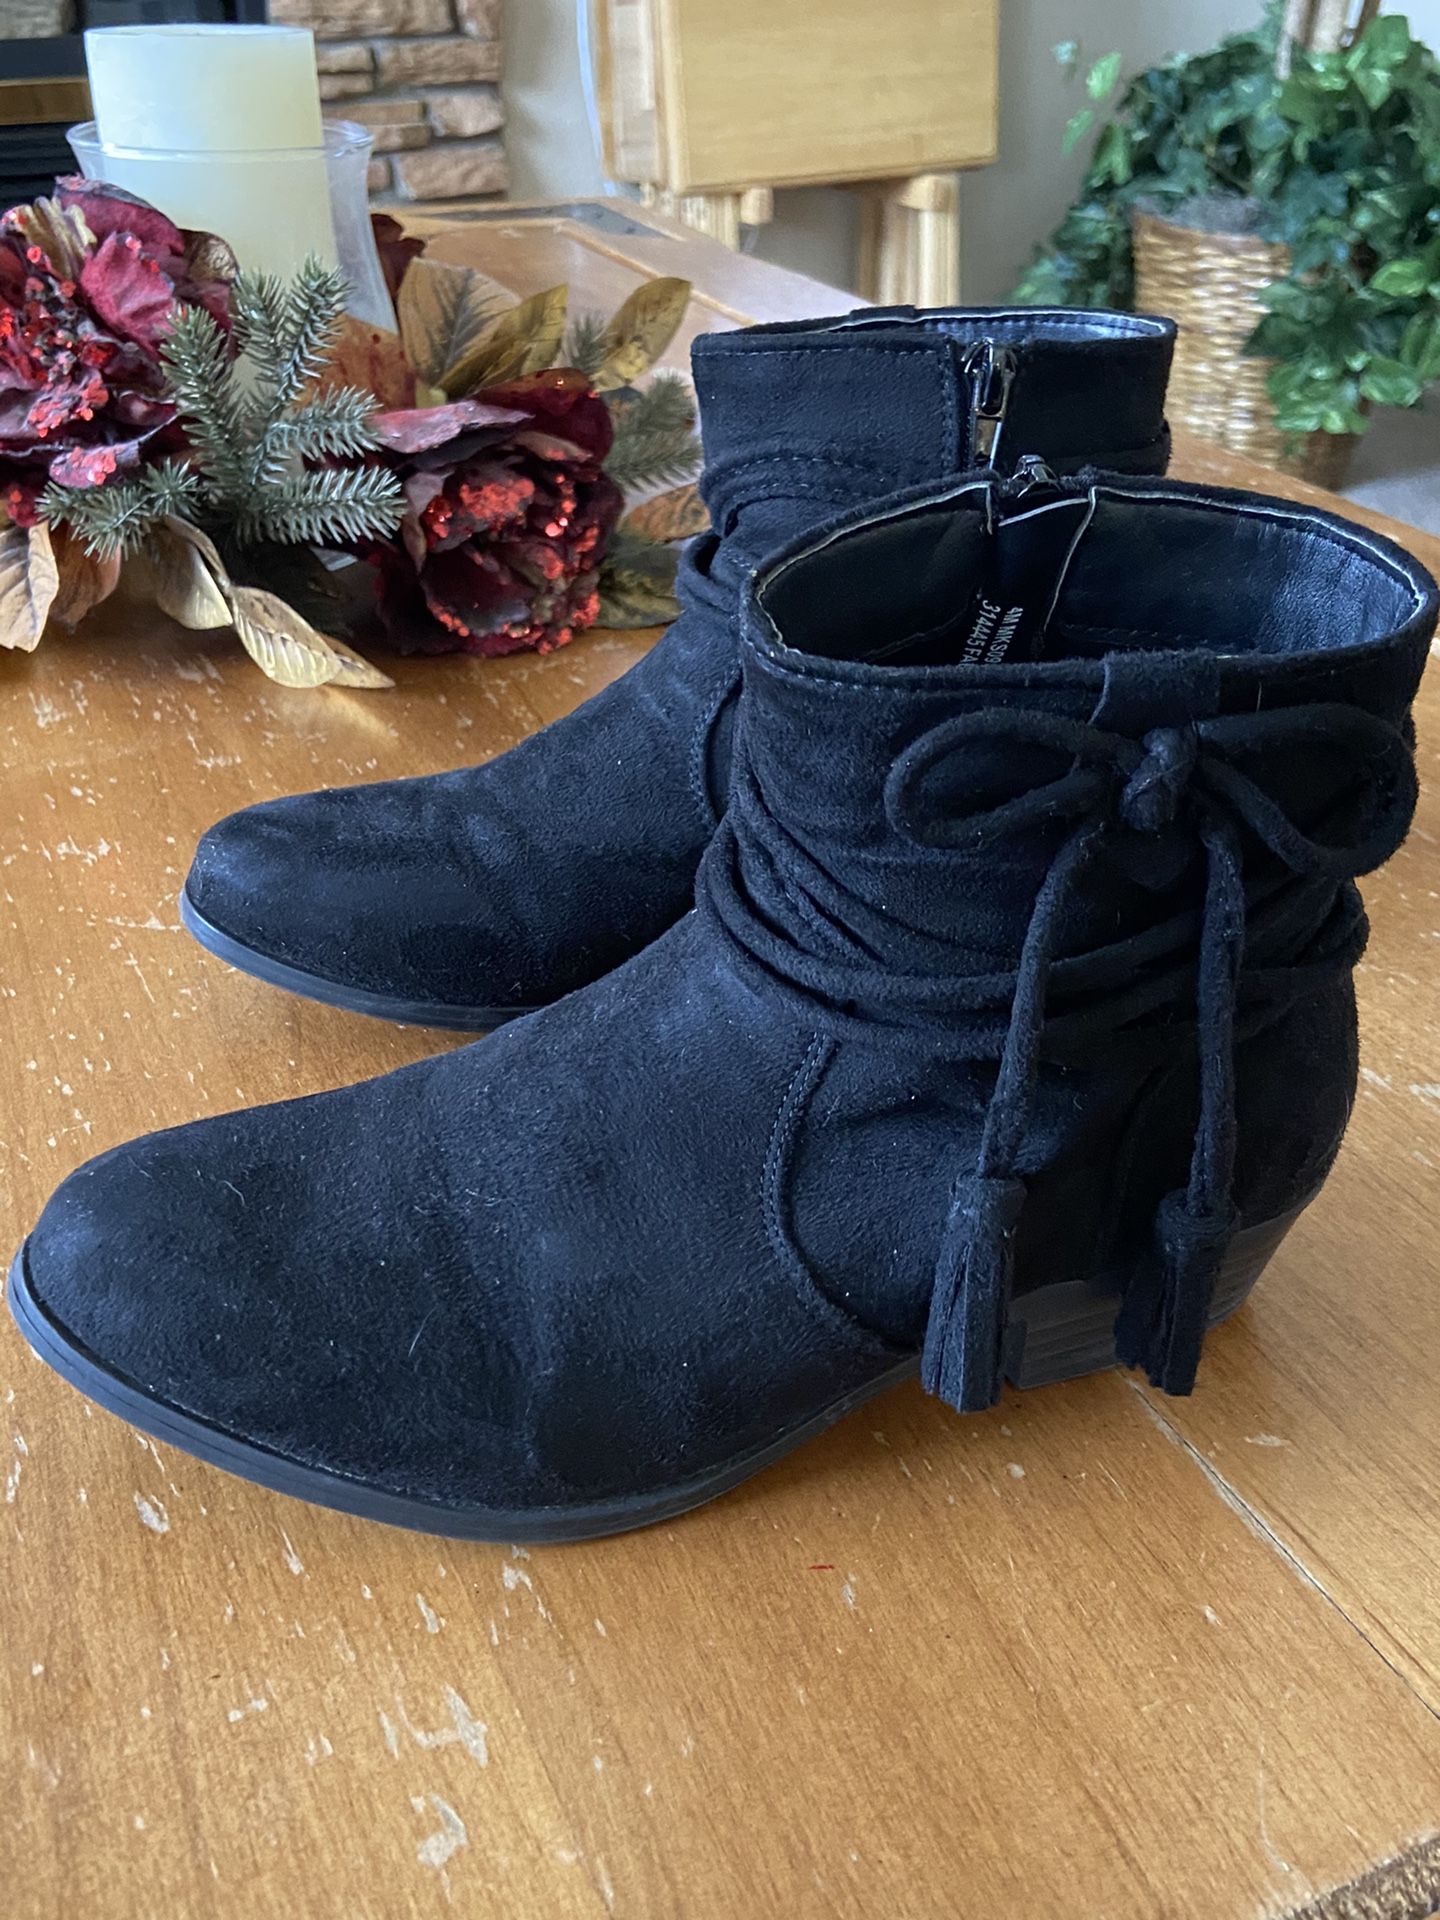 Girls suede black boots (size 4)